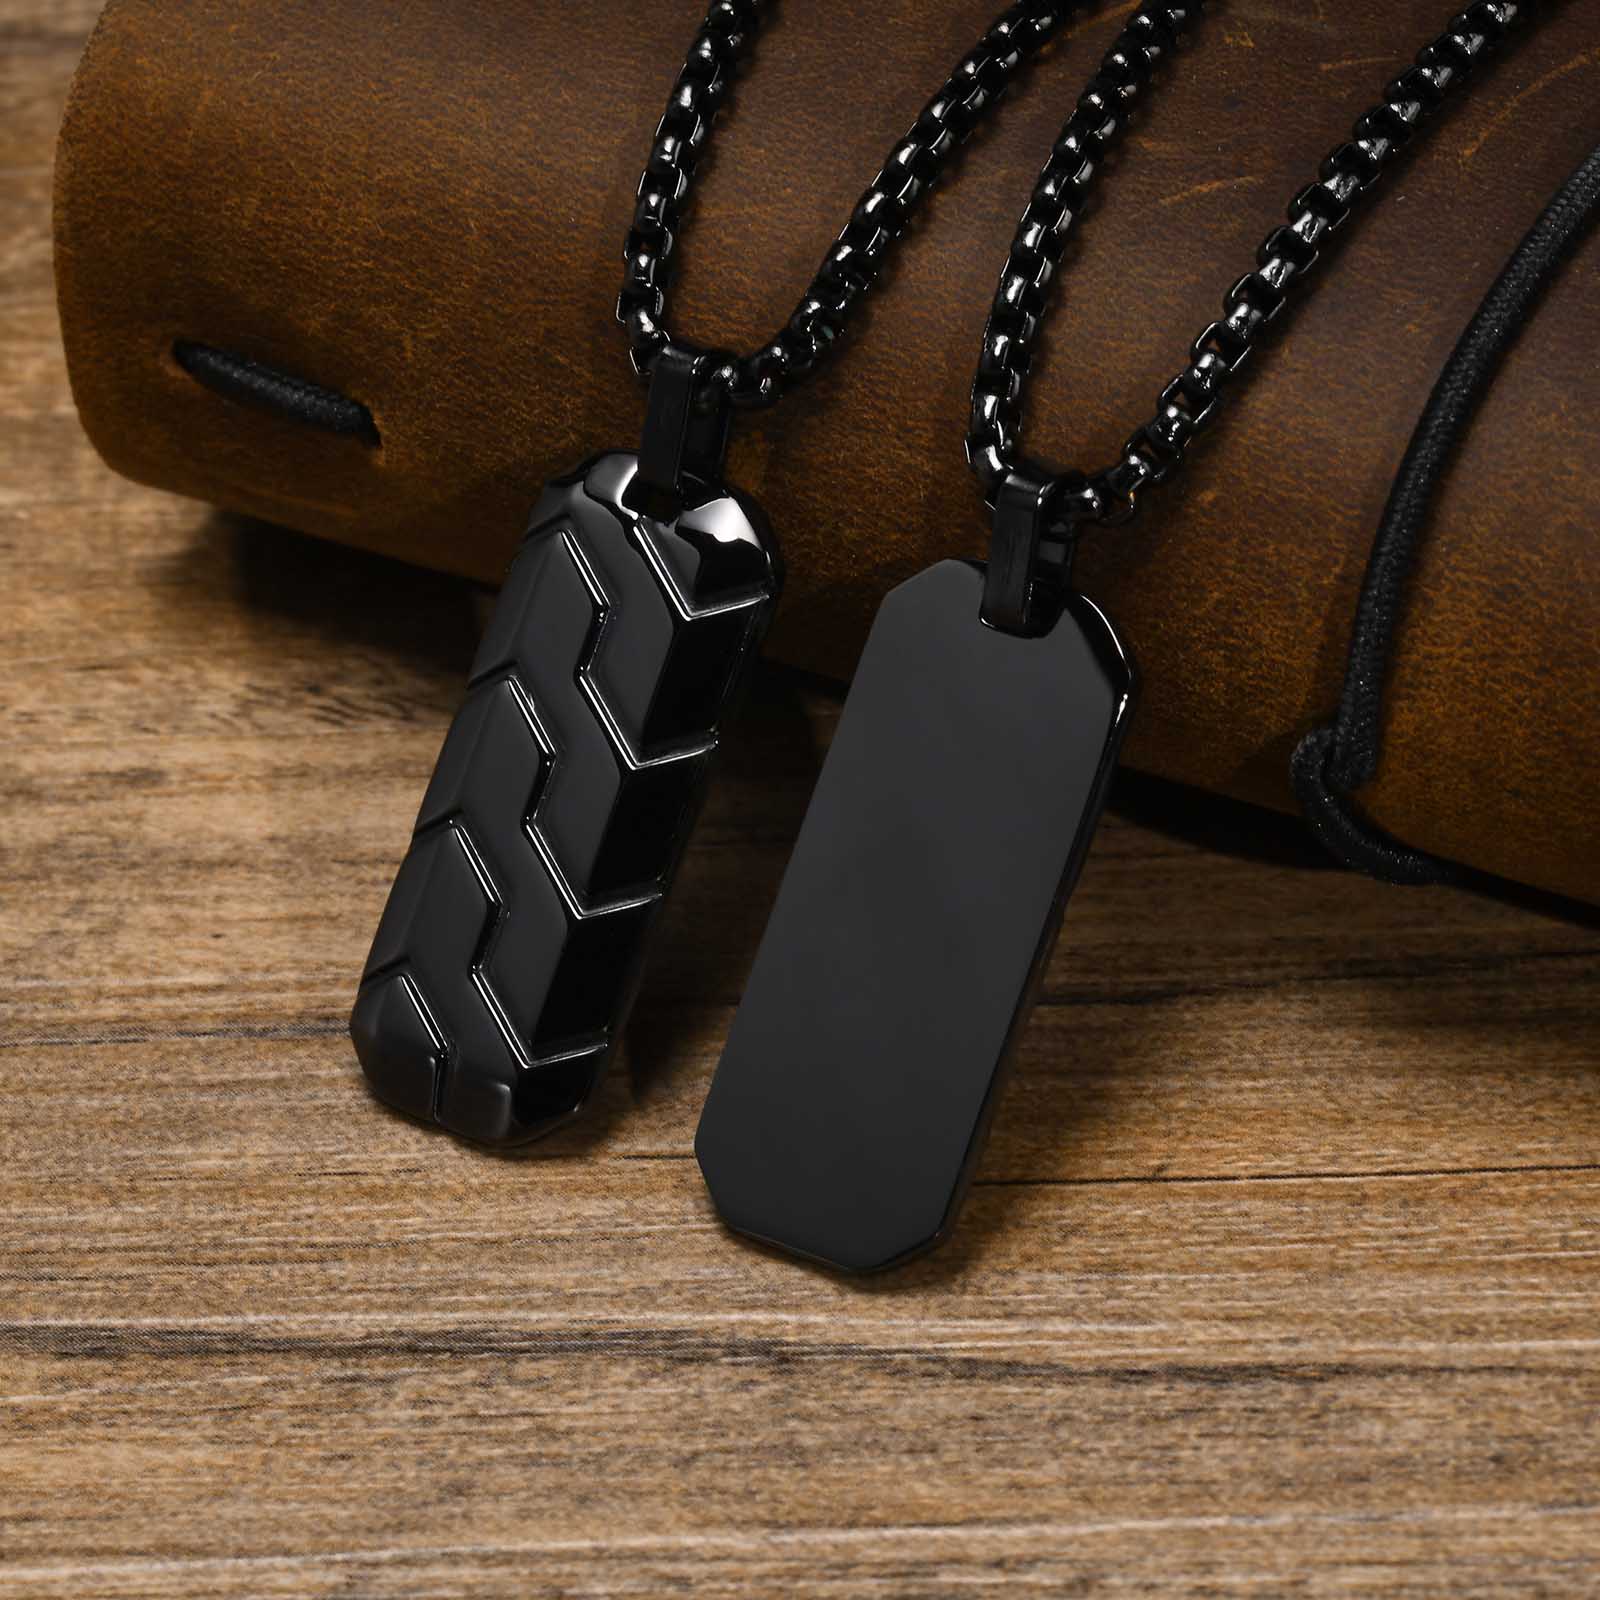 Vnox Cool Tire Pattern Necklaces for Men Boys, Stainless Steel Geometric Bar Pendant Collar, Punk Stylish Gifts for Him PN-1857B